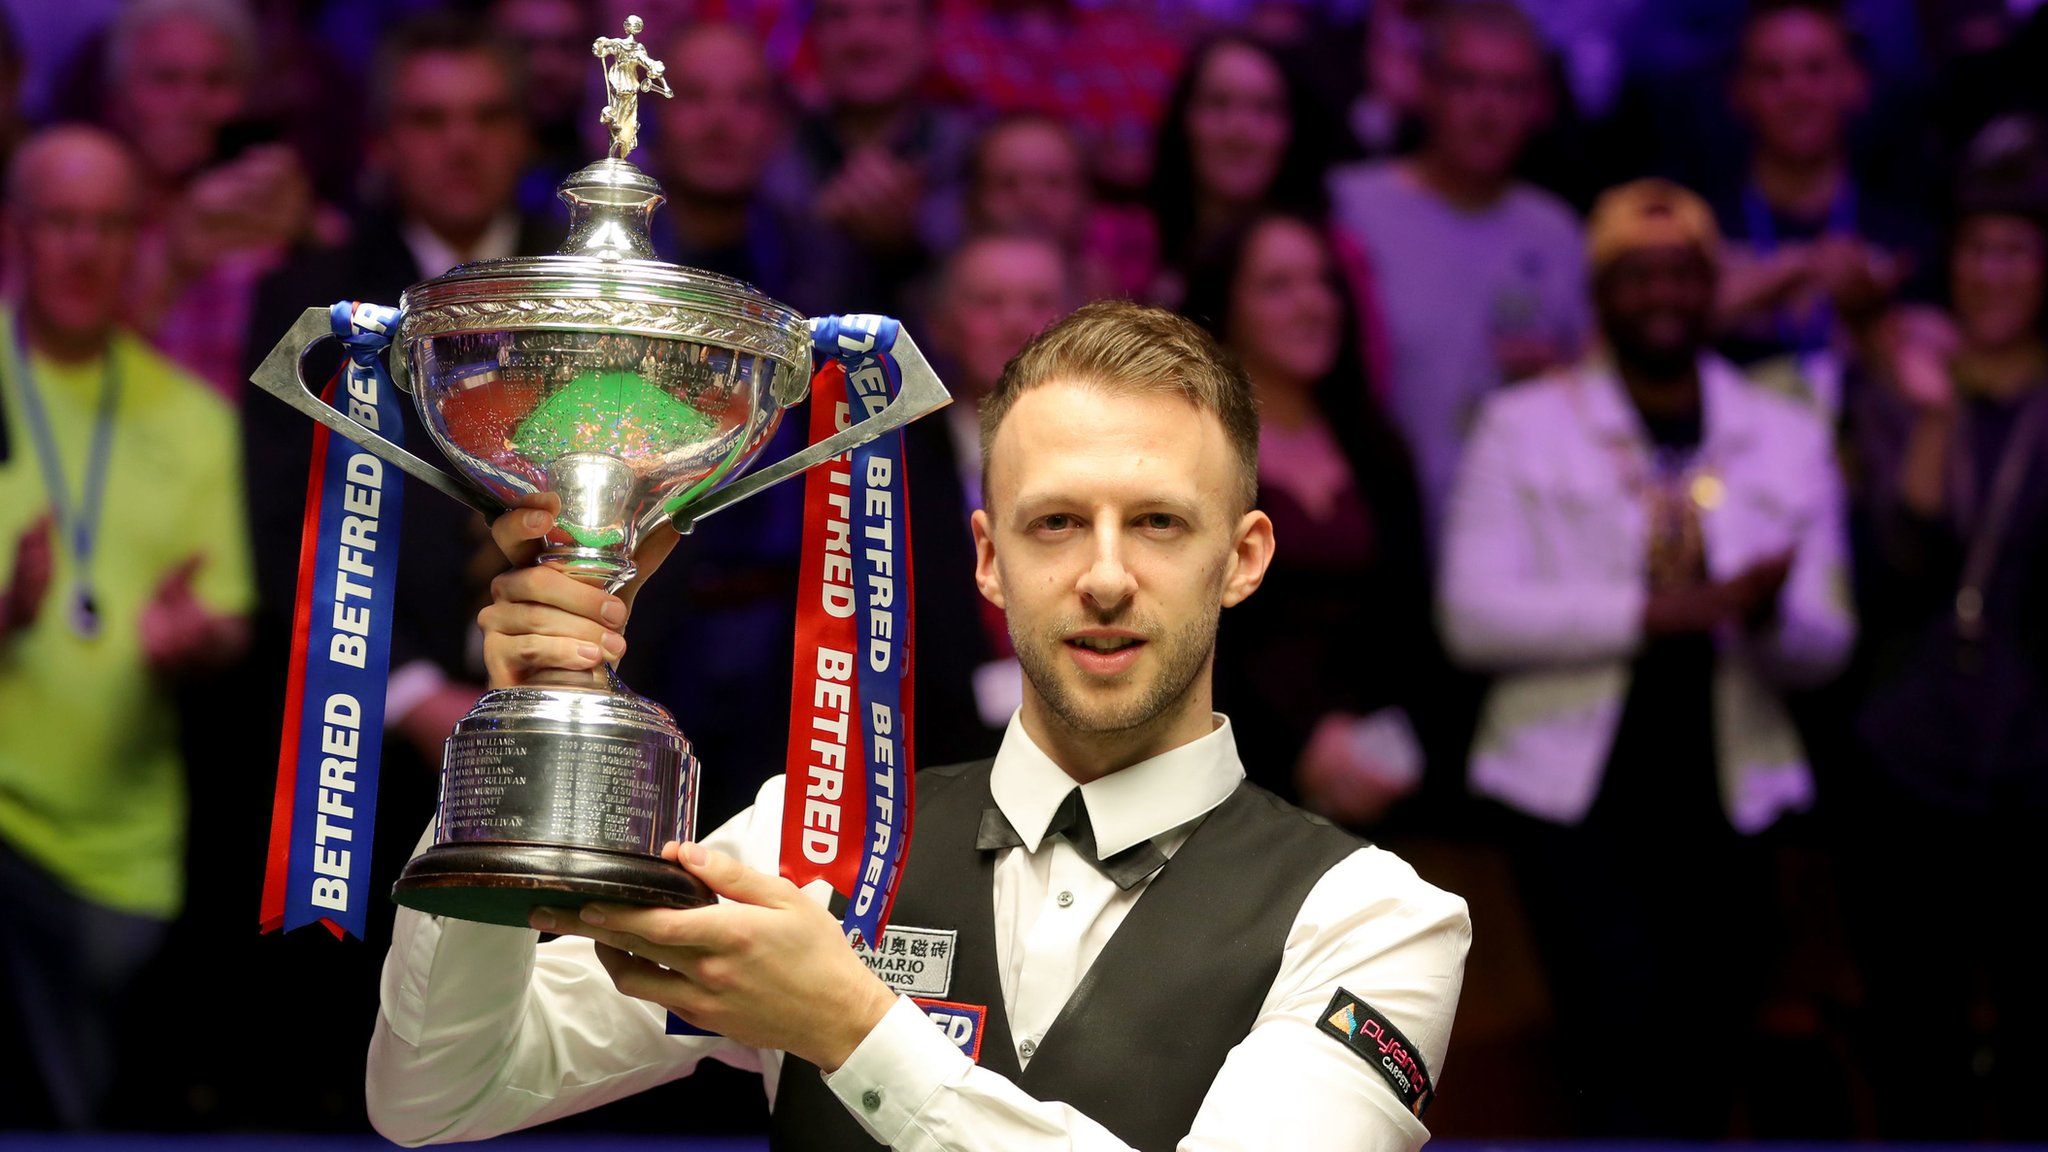 Judd Trump with the trophy